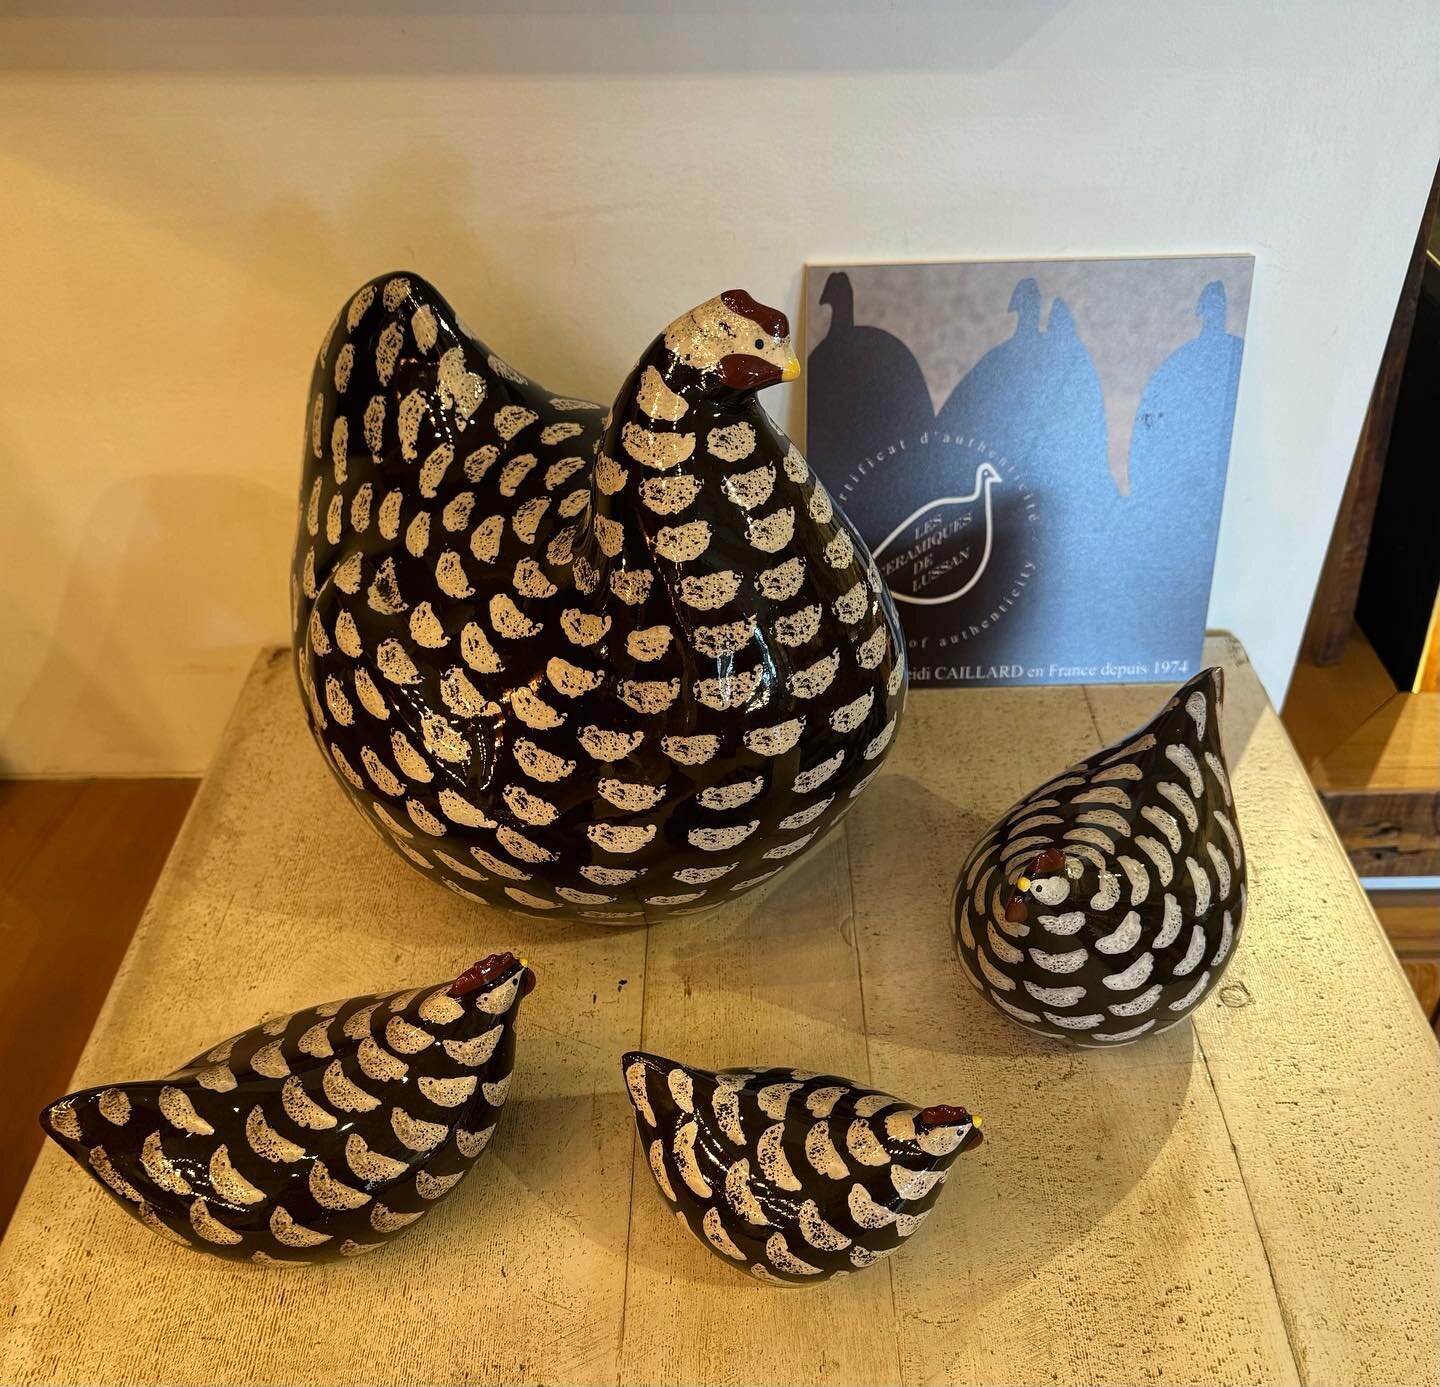 Just flown in! Decorative 🐦 meticulously created by hand. 

#pastbasketmilwaukee #shopsmall #decorativebirds #artisanmade #mke #414 #milwaukee #giftshop #womanownedbusiness🙆&zwj;♀️